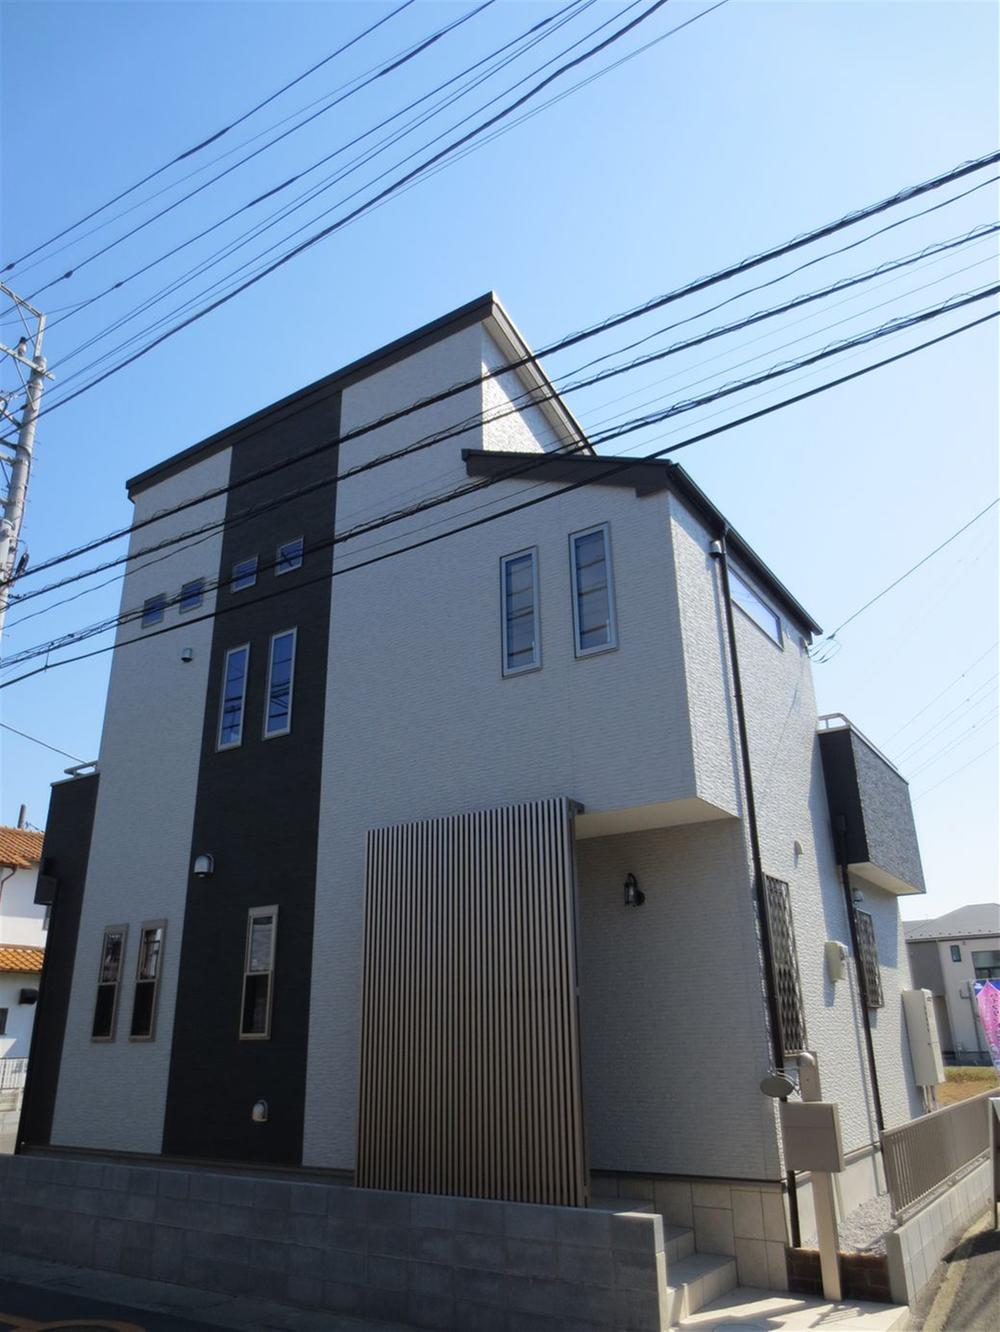 Building plan example (Perth ・ appearance). Building plan example Building price 15.8 million yen, Building area 92.7 sq m